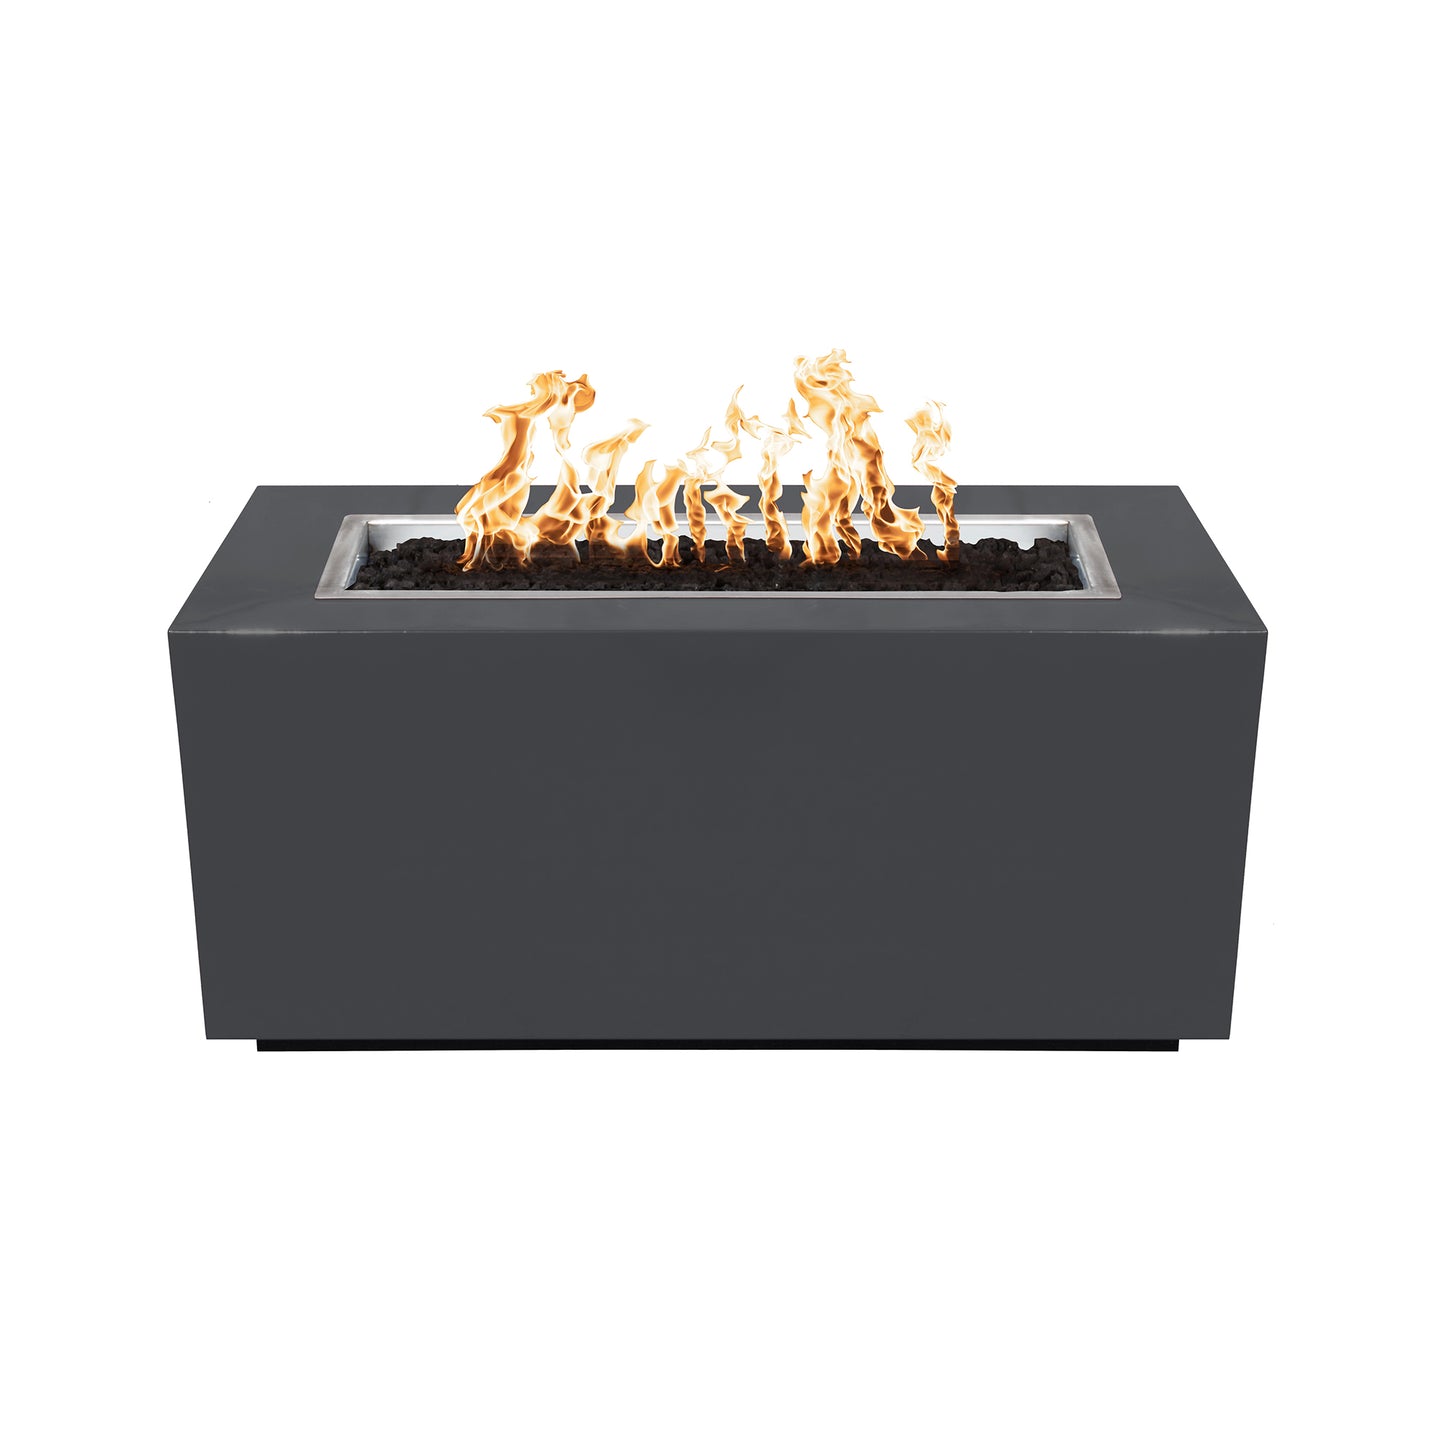 Pismo Metal Fire Pit 84" - Electronic Ignition